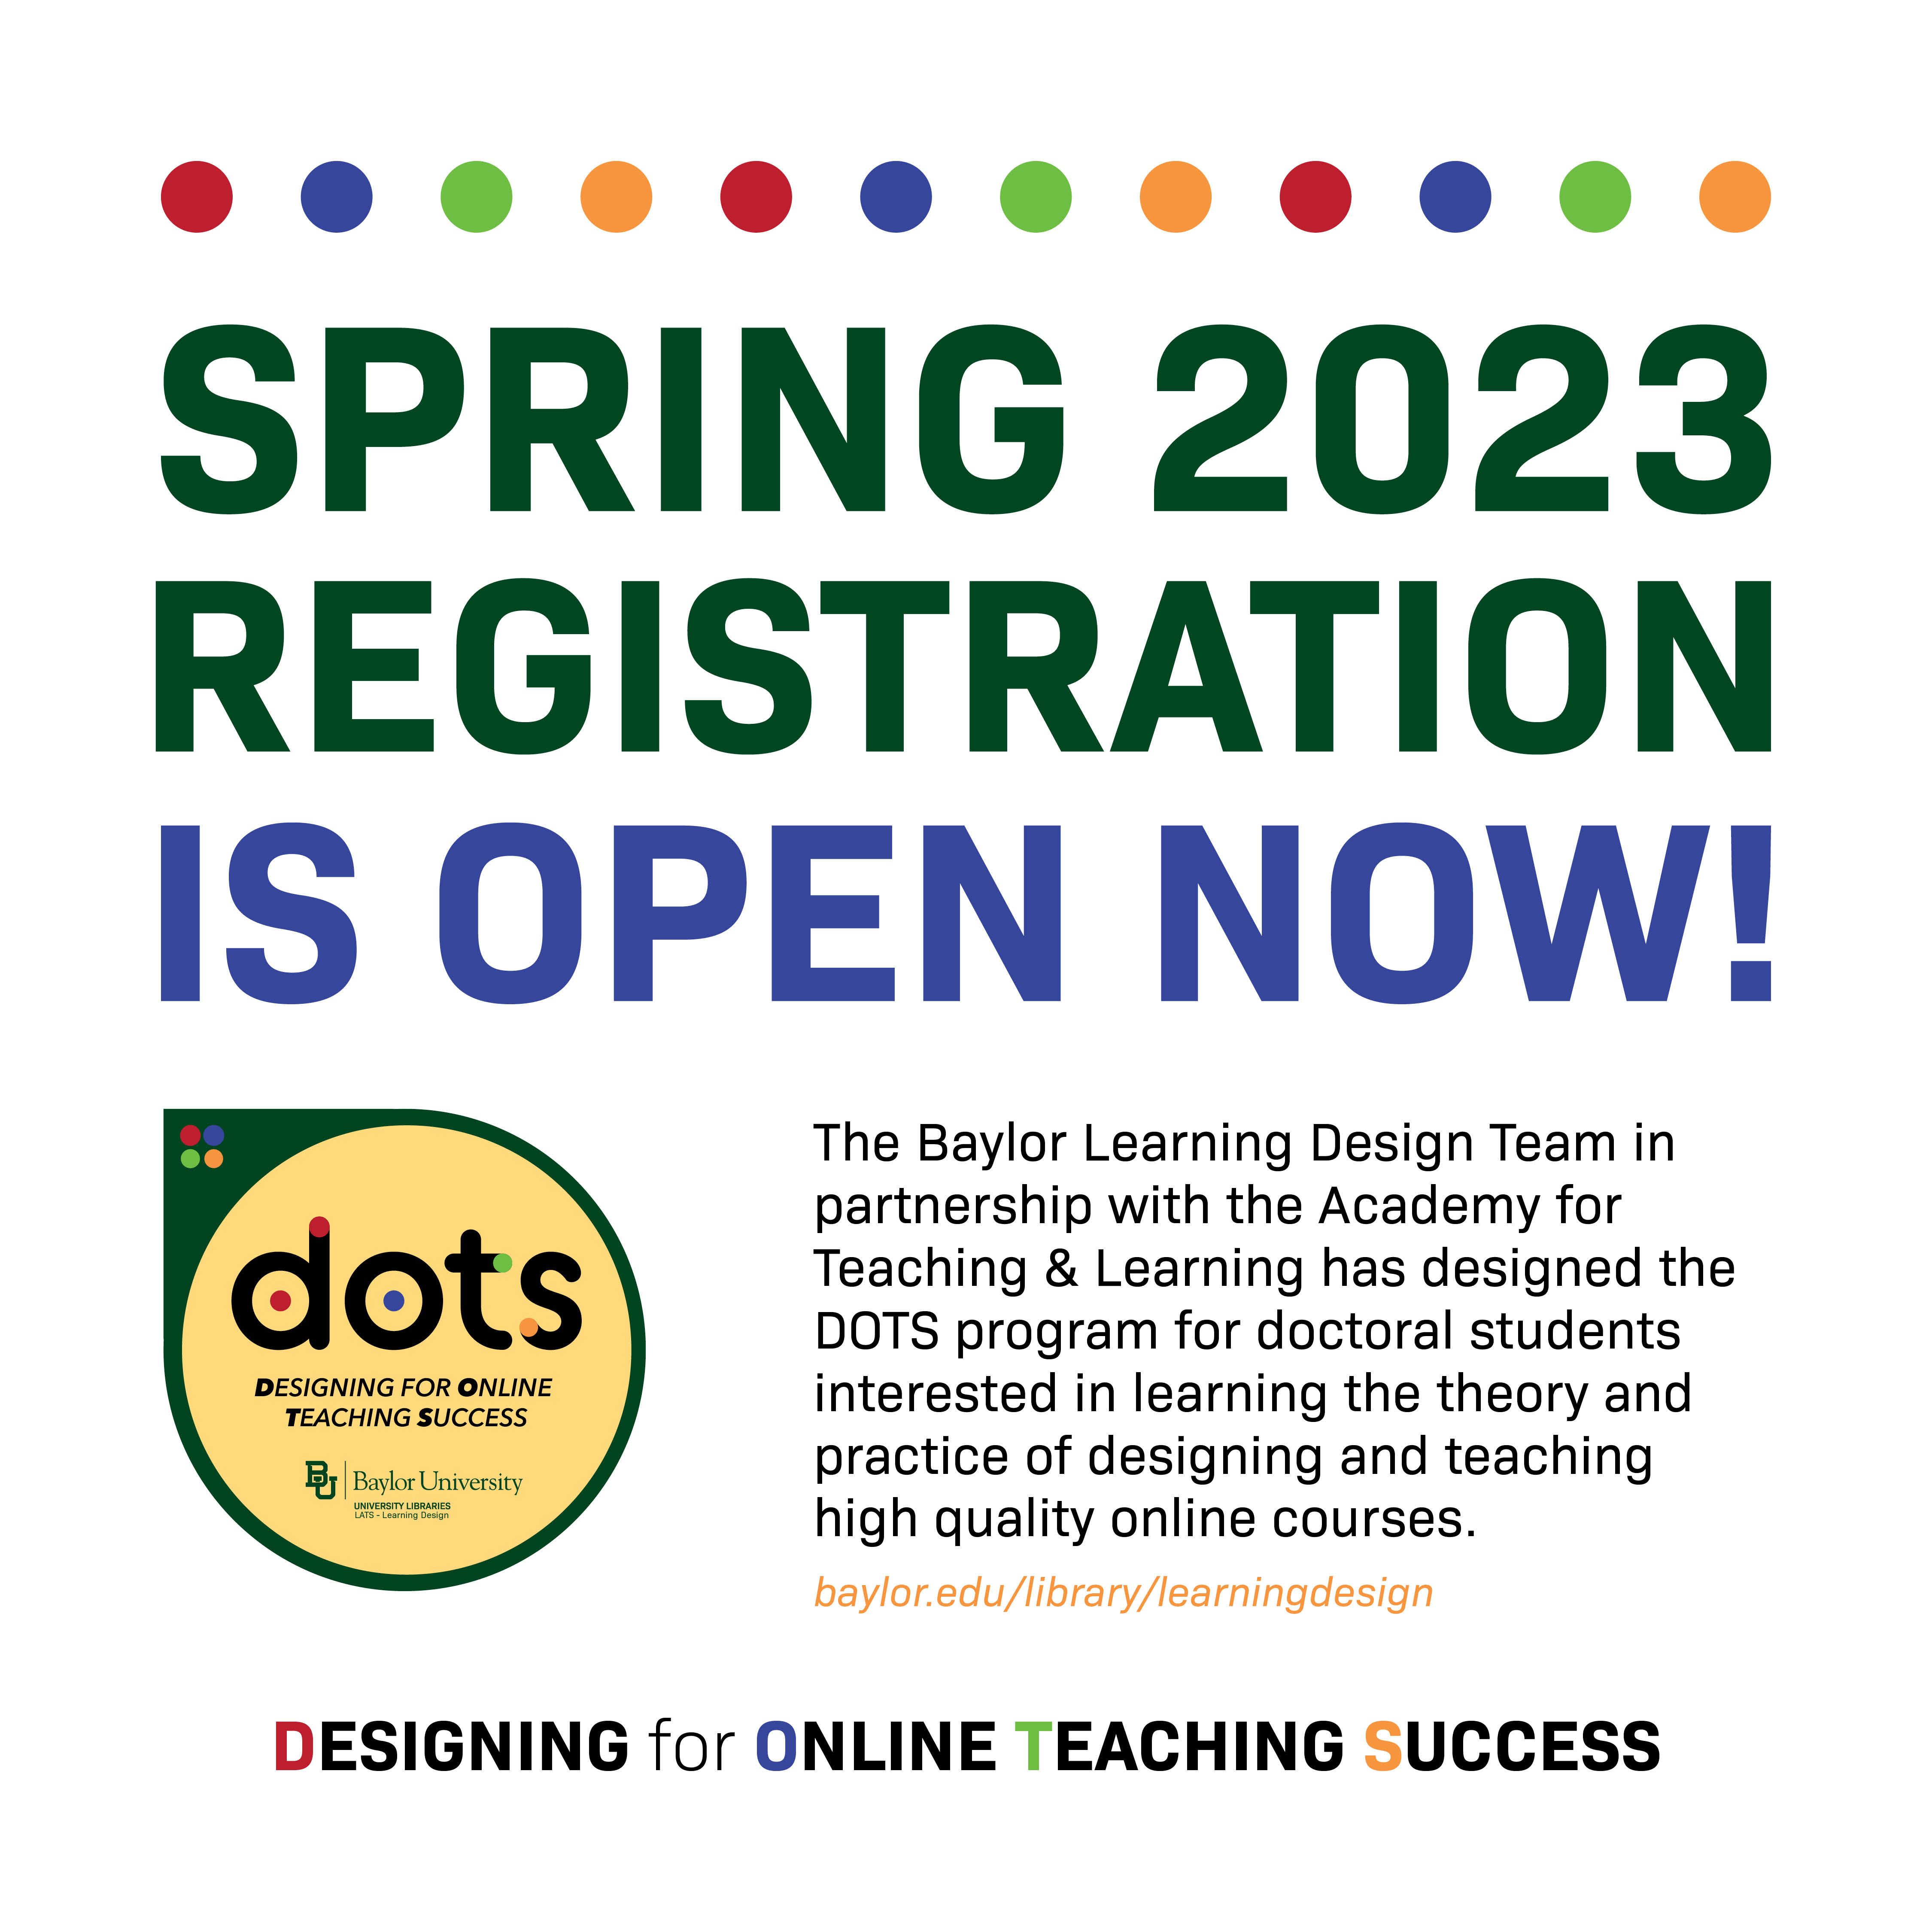 Spring 2023 Registration is open now! The Baylor Learning Design Team in partnership with the Academy for Teaching and Learning has designed the DOTS program for doctoral students interested in learning the theory and practice of designing and teaching high quality online courses. Baylor.edu/library/learningdesign